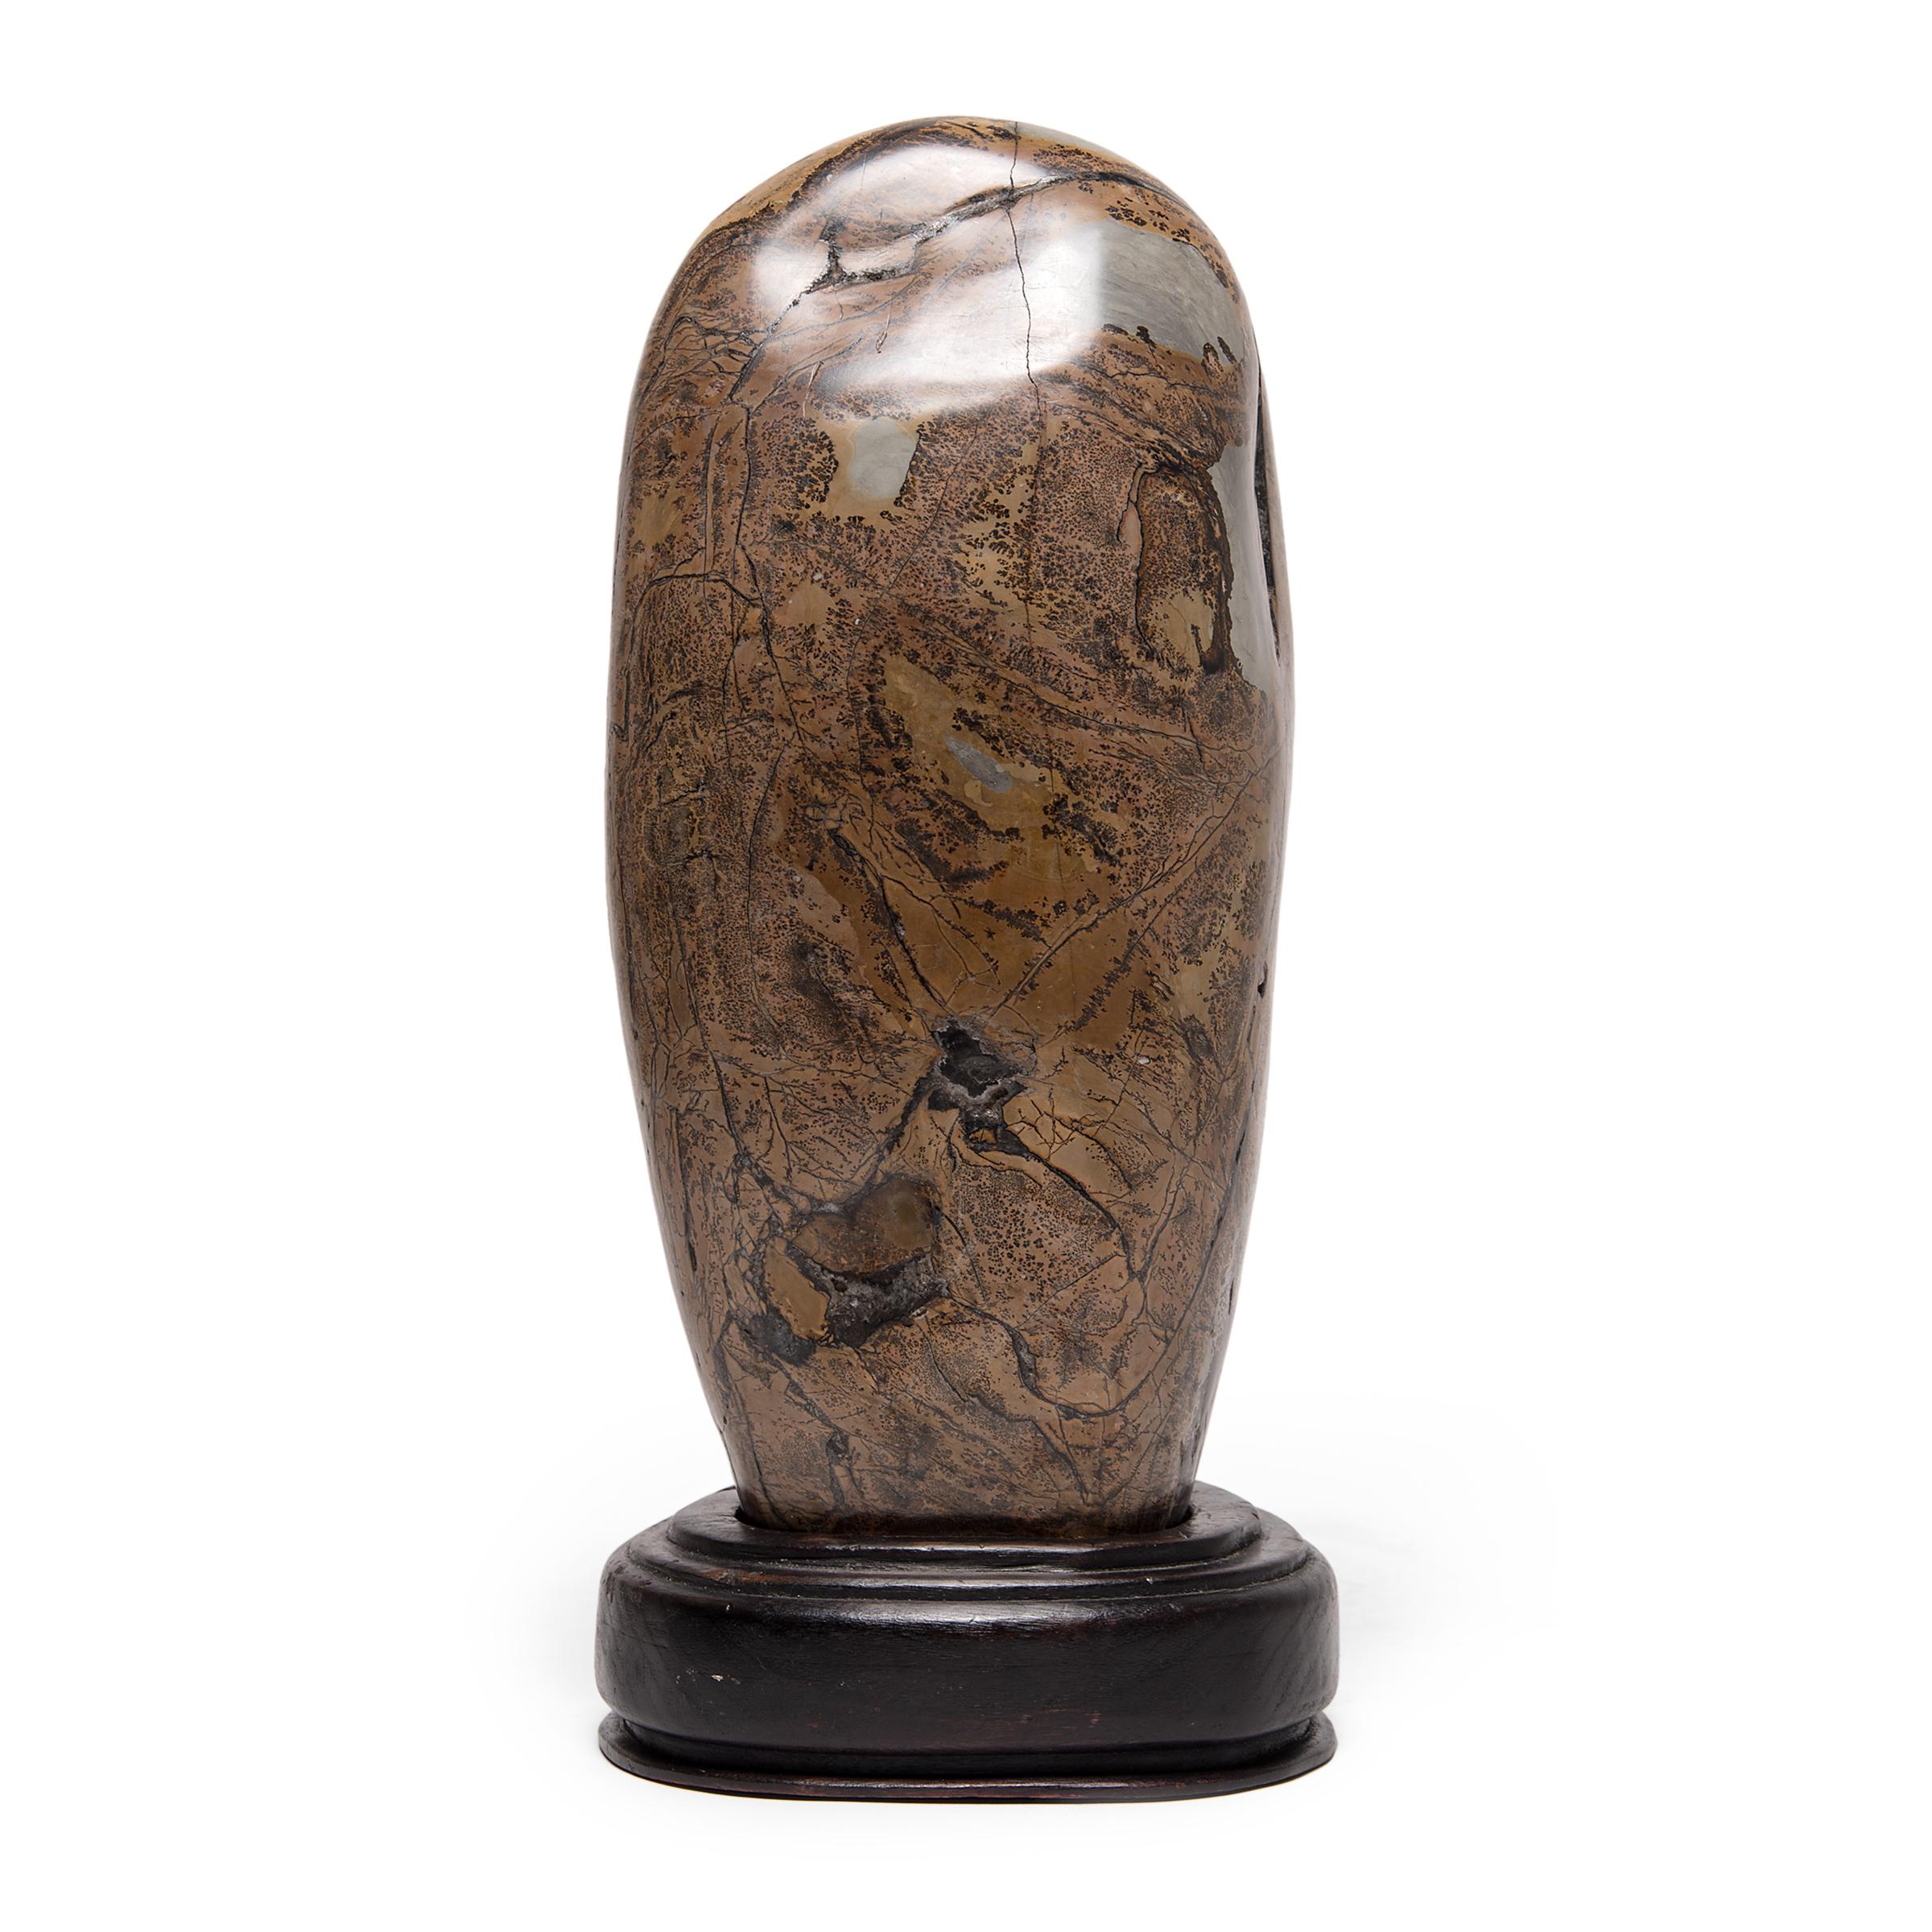 As if brushed with ink and inscribed with intricate calligraphy, this polished jasper stone is covered in spectacular swirls and intricate patterns. Unusual stones such as this one have been appreciated by Chinese painters, poets, and calligraphers